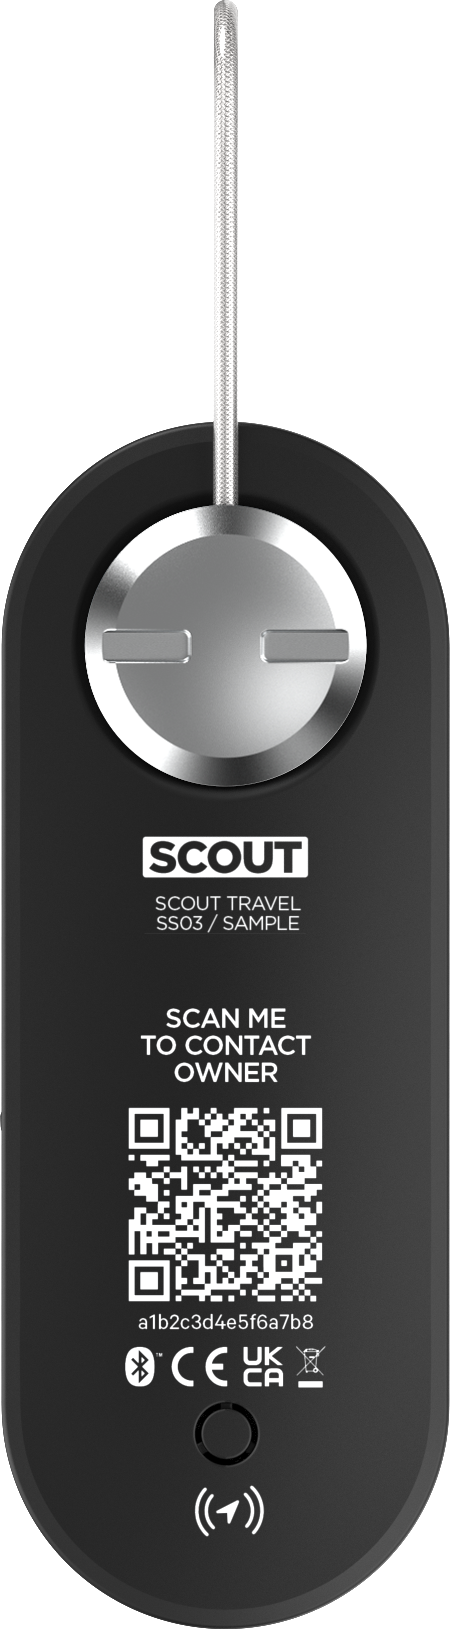 KNOG - Scout Travel Smart Luggage Tag with Tracker - Black-3